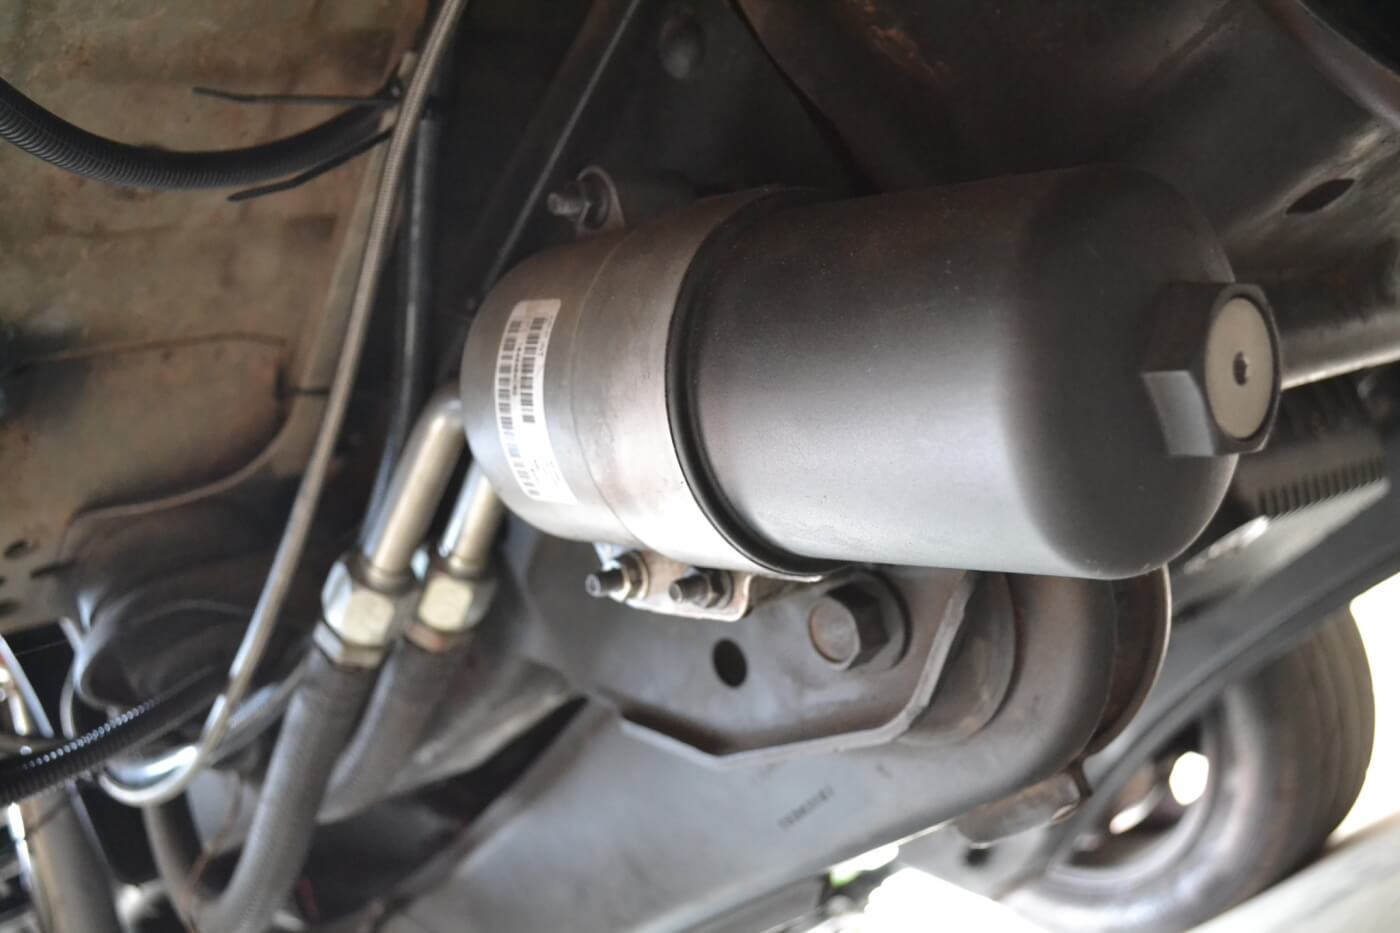 With a bunch of turbos, piping, and other hardware taking up under-hood space, the factory oil filter was relocated to the frame rail of the truck. This was done with factory Ford parts, as an E-series Ford van actually uses this type of setup.